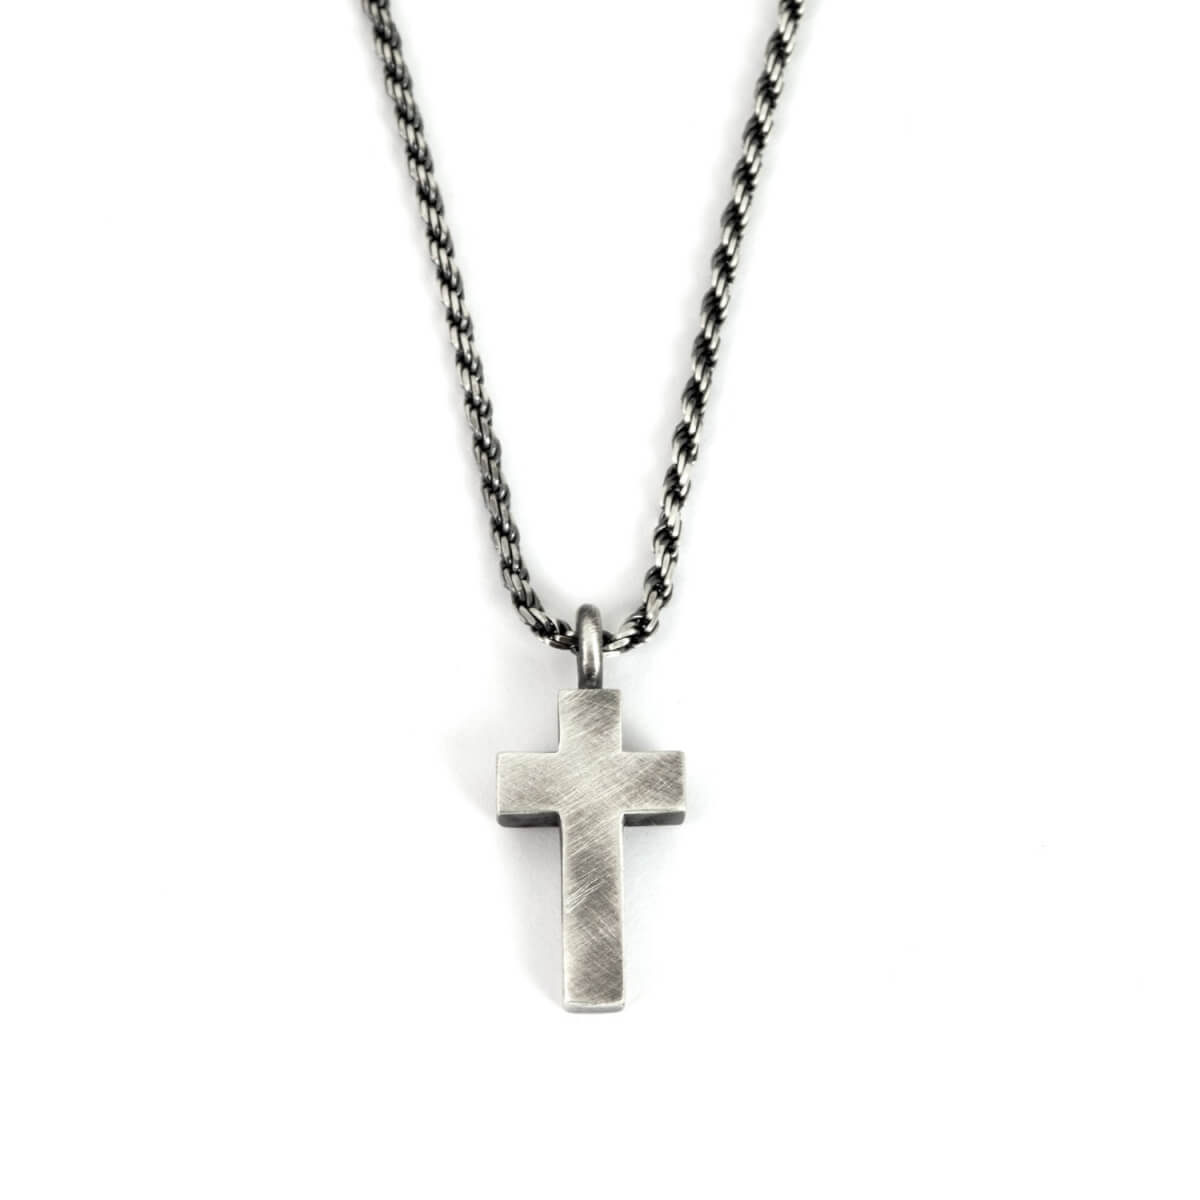 Mens Cross Necklace, Sterling Silver Tomerm Jewelry